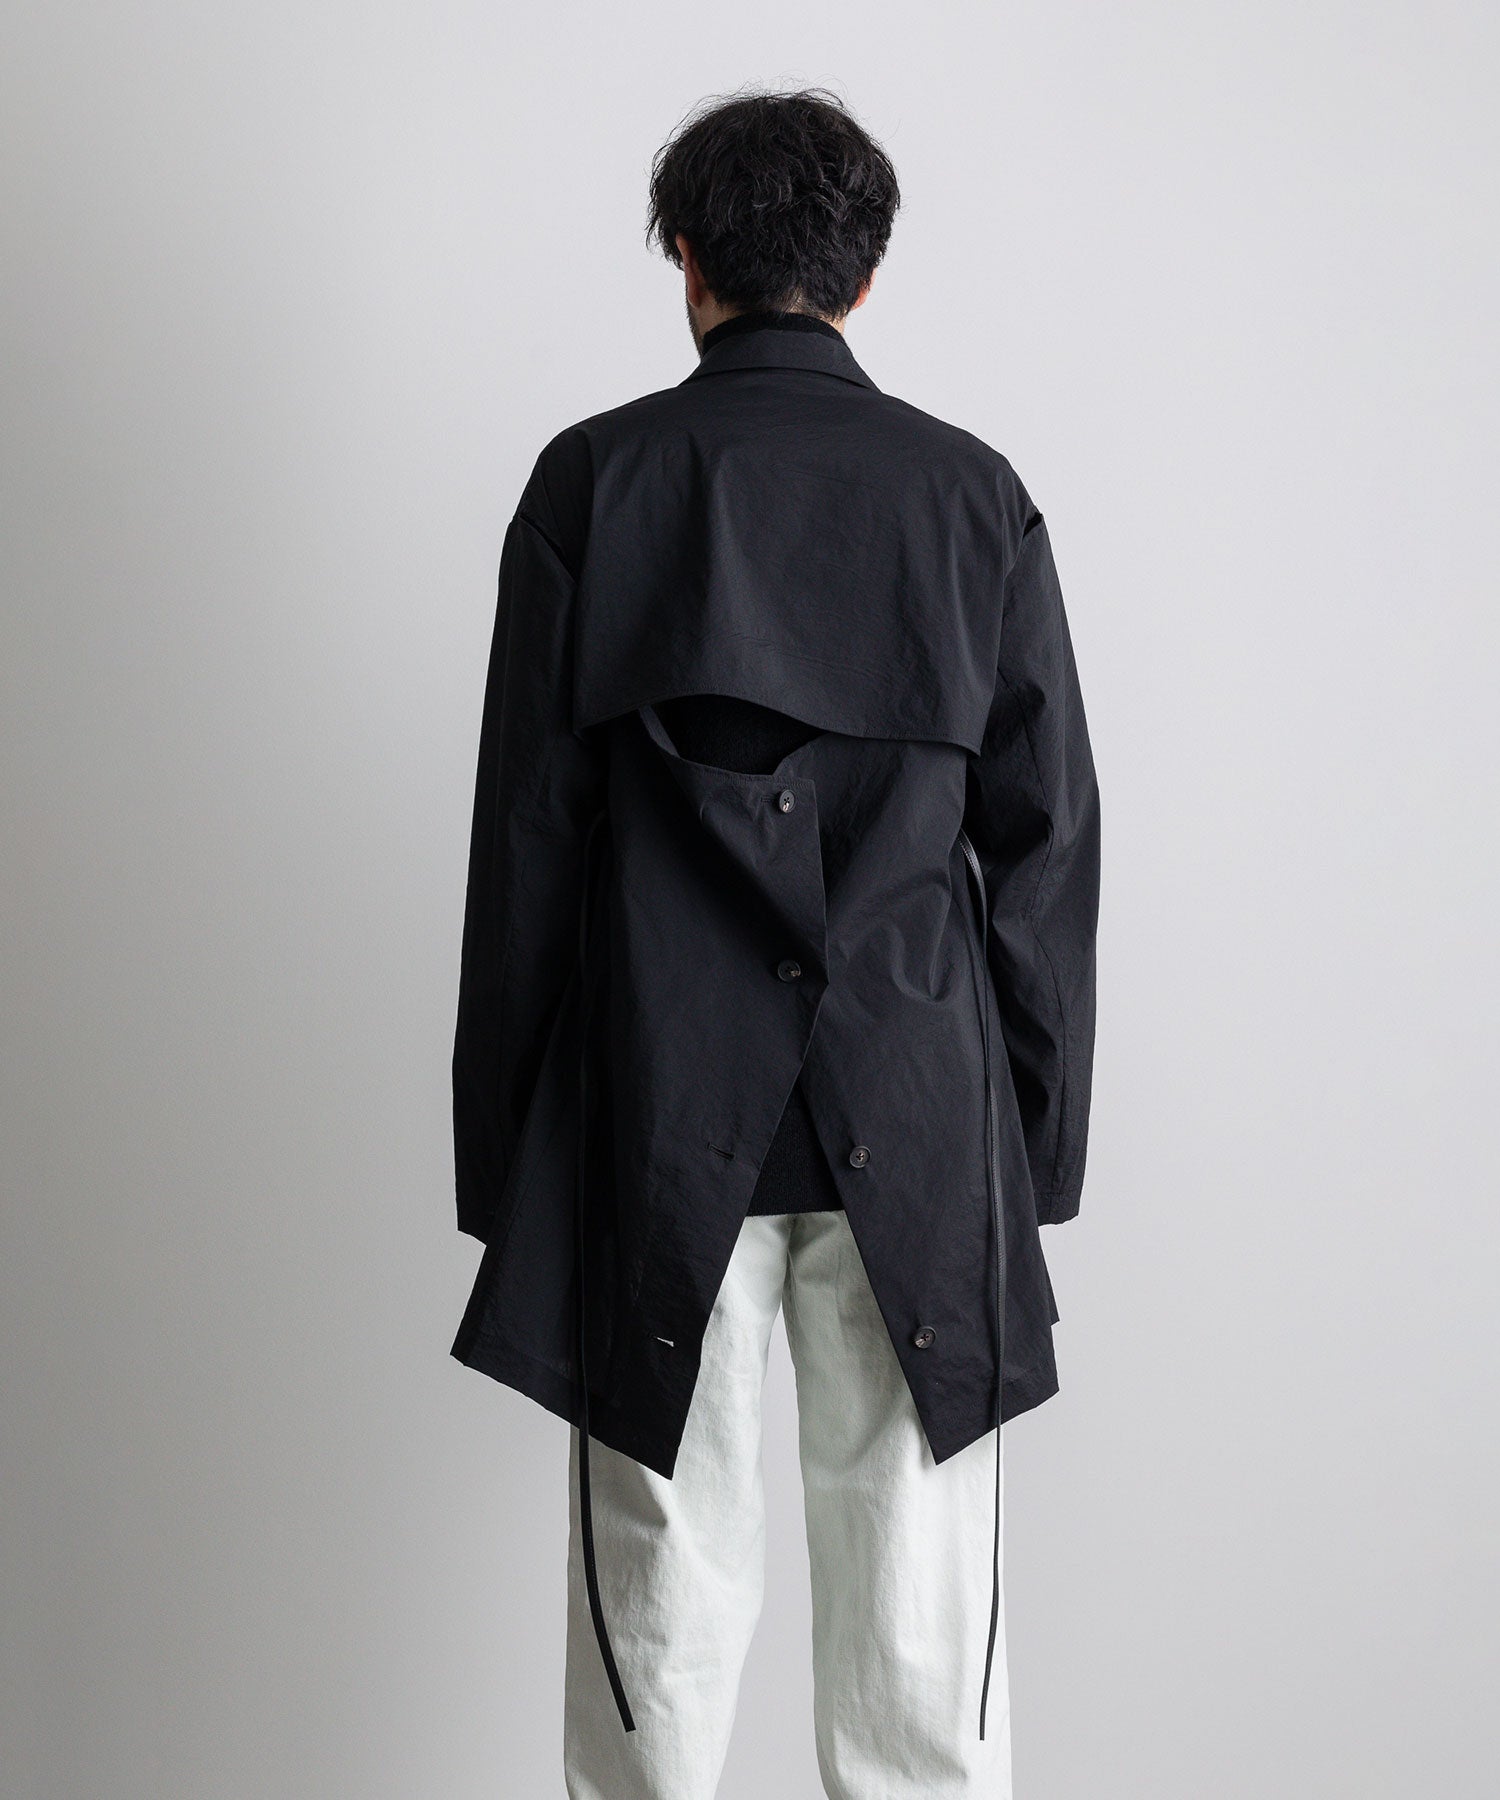 stein(シュタイン)の23SSコレクションのOVERSIZED NEW STRUCTURE TAILORED JACKETのBLACK